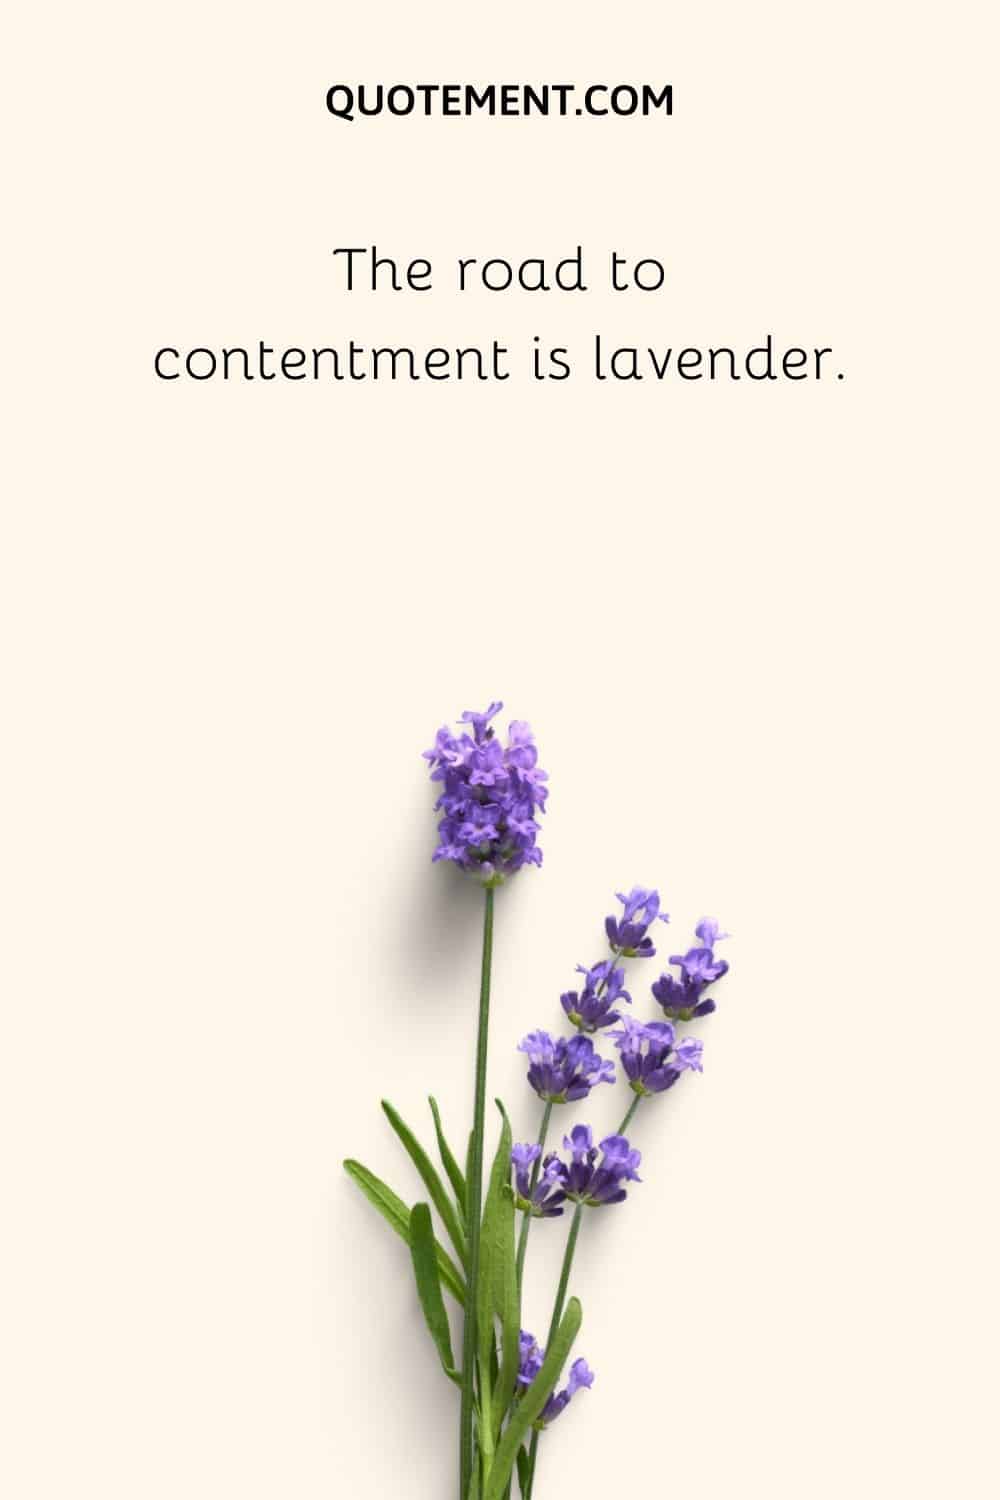 The road to contentment is lavender